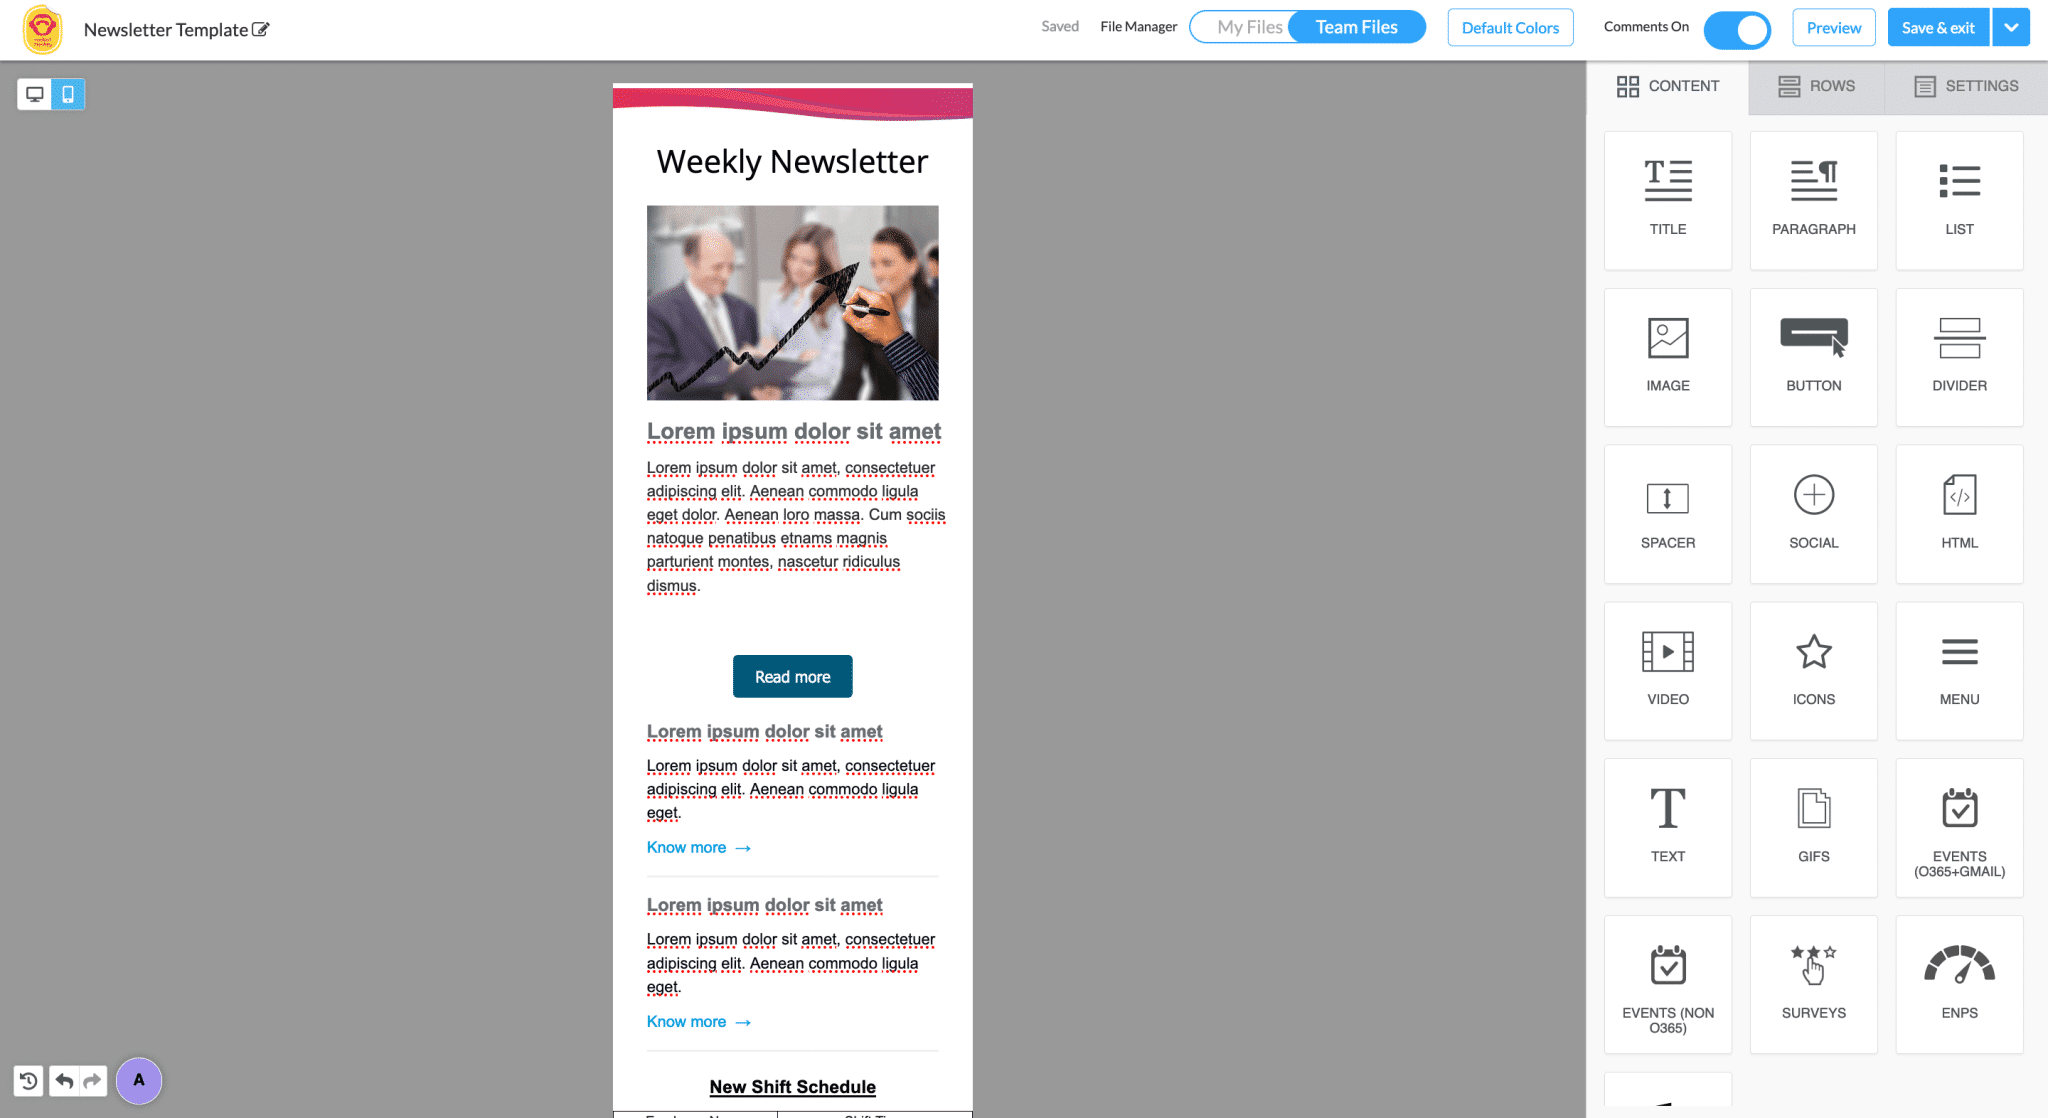 Screenshot of an email newsletter being previewed for mobile devices within ContactMonkey's email template builder.